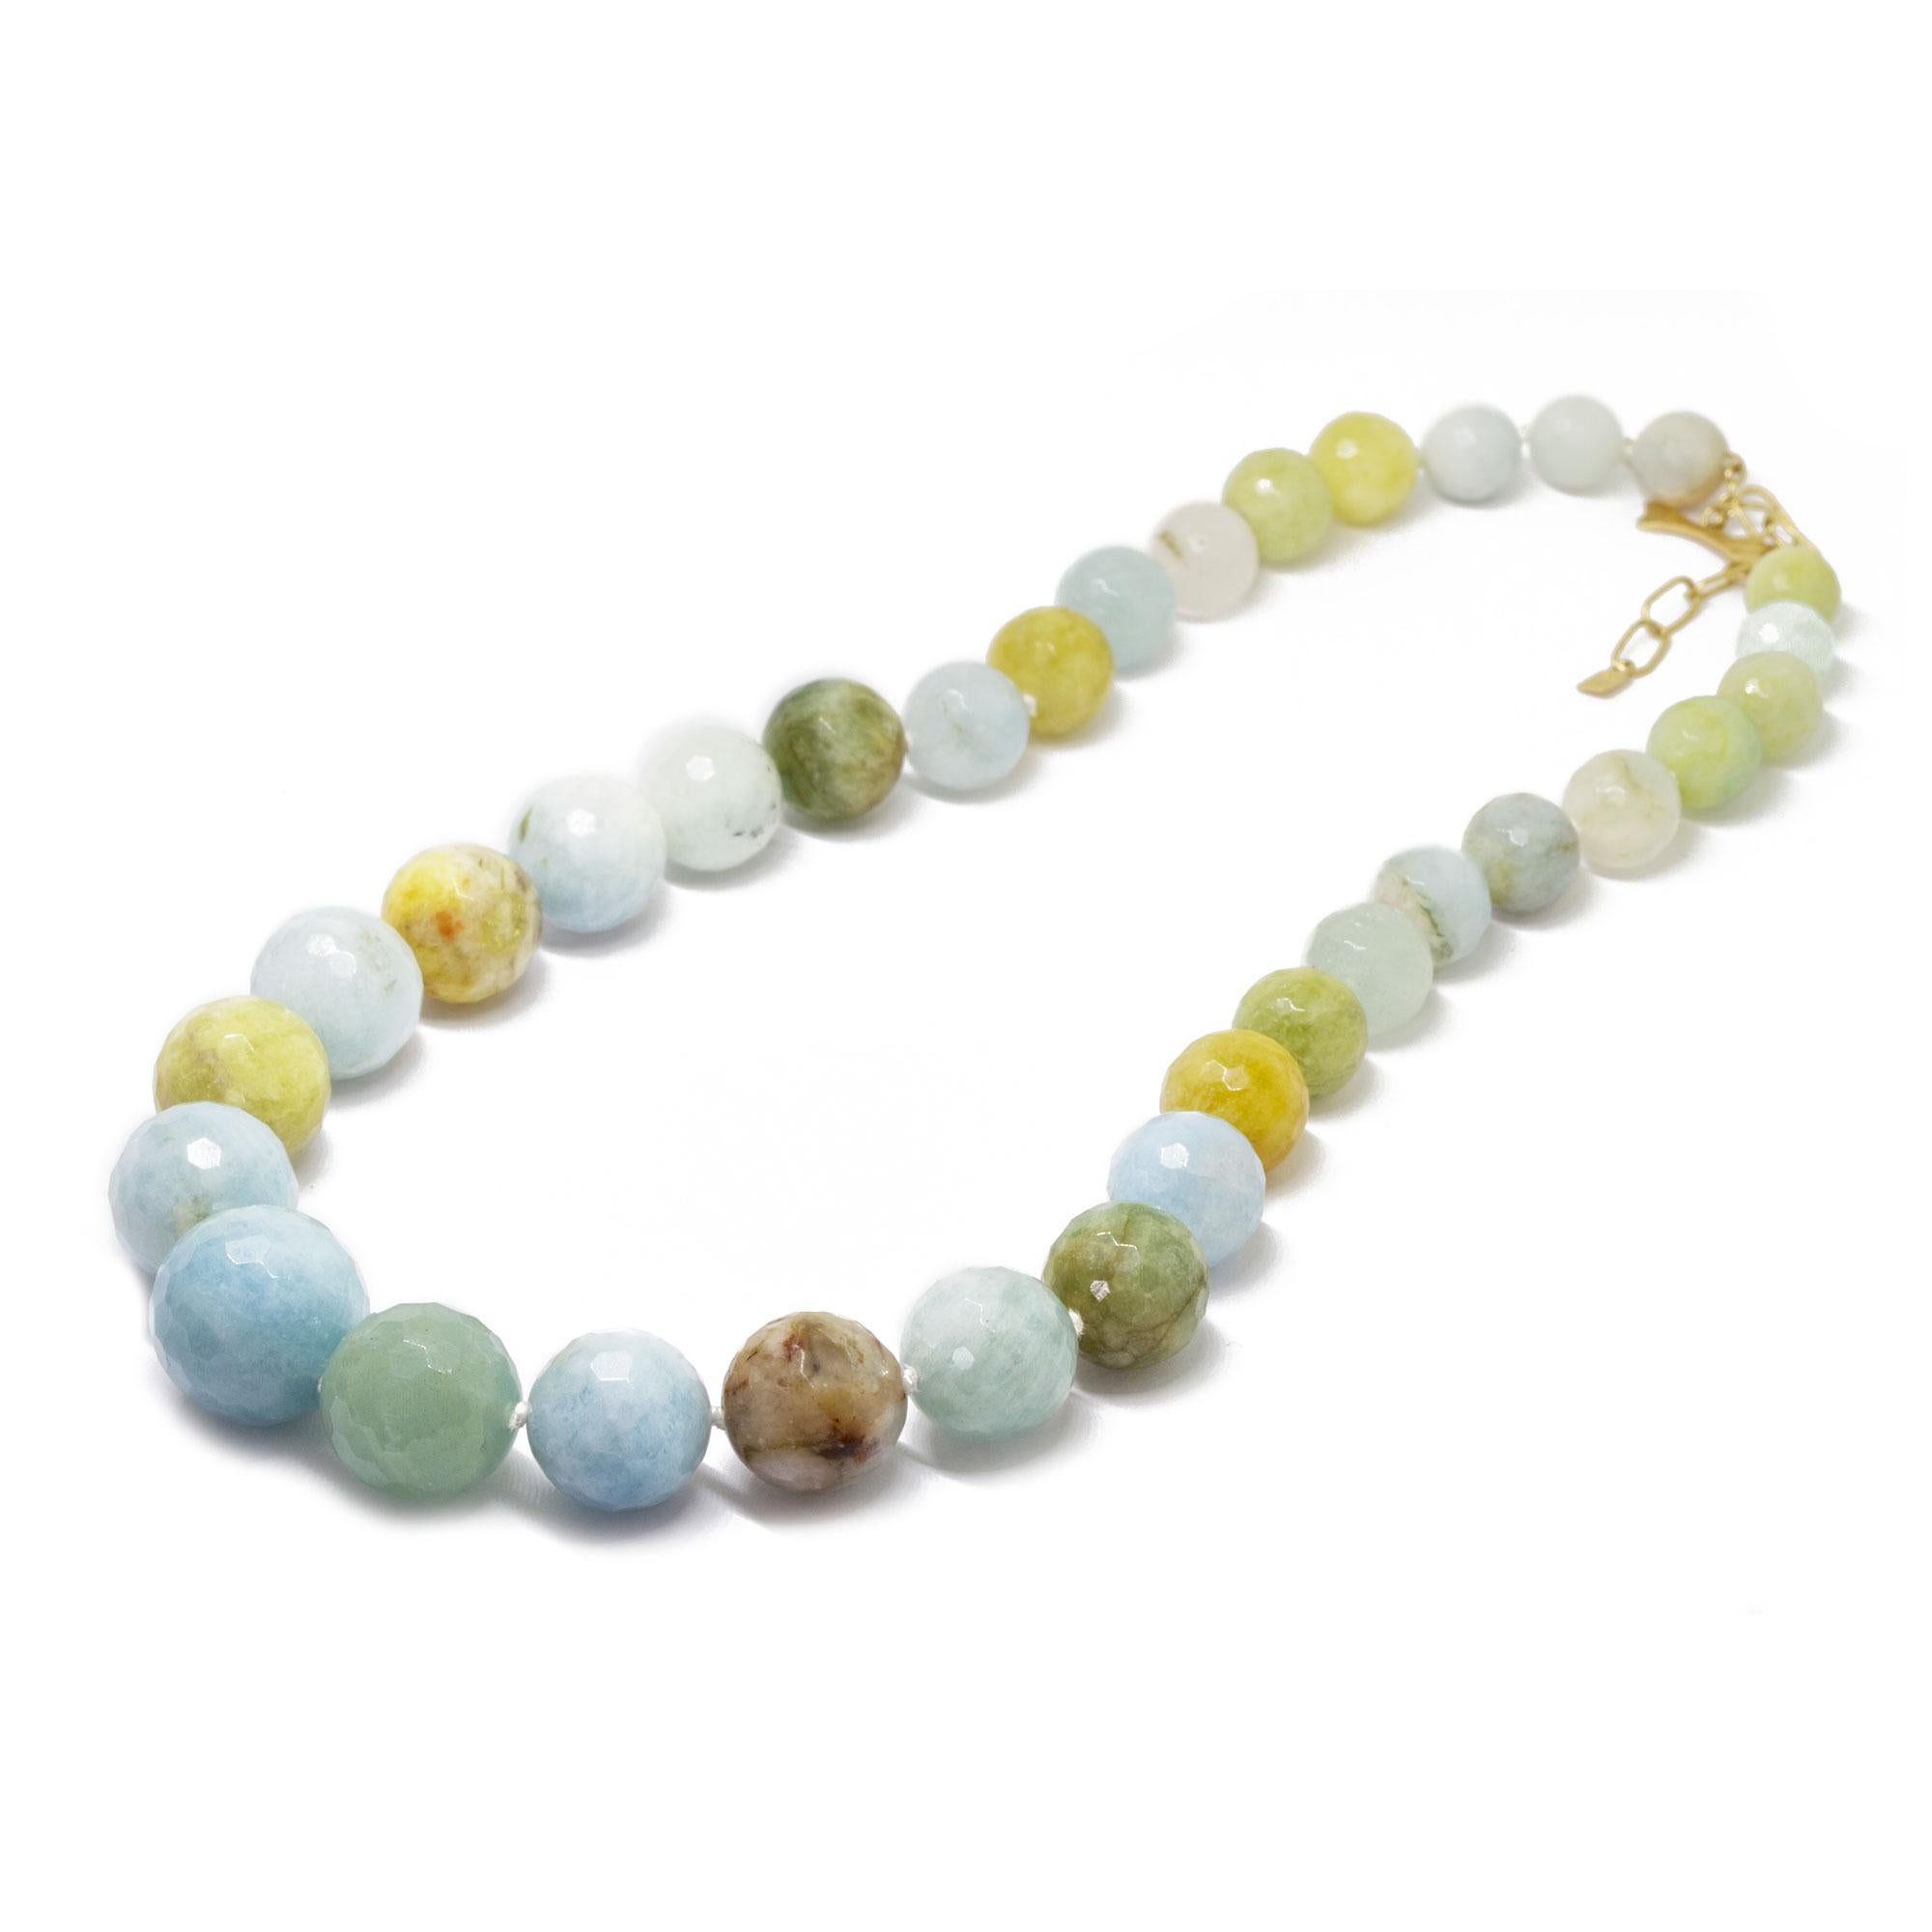 Metal: 18K Yellow Gold
Stone Size: 6-17mm
Length: 17-19''

About the stones:
Genuine Aquamarine
As the blue-green, highly prized variety of the mineral beryl, aquamarine takes its name from the Latin for 